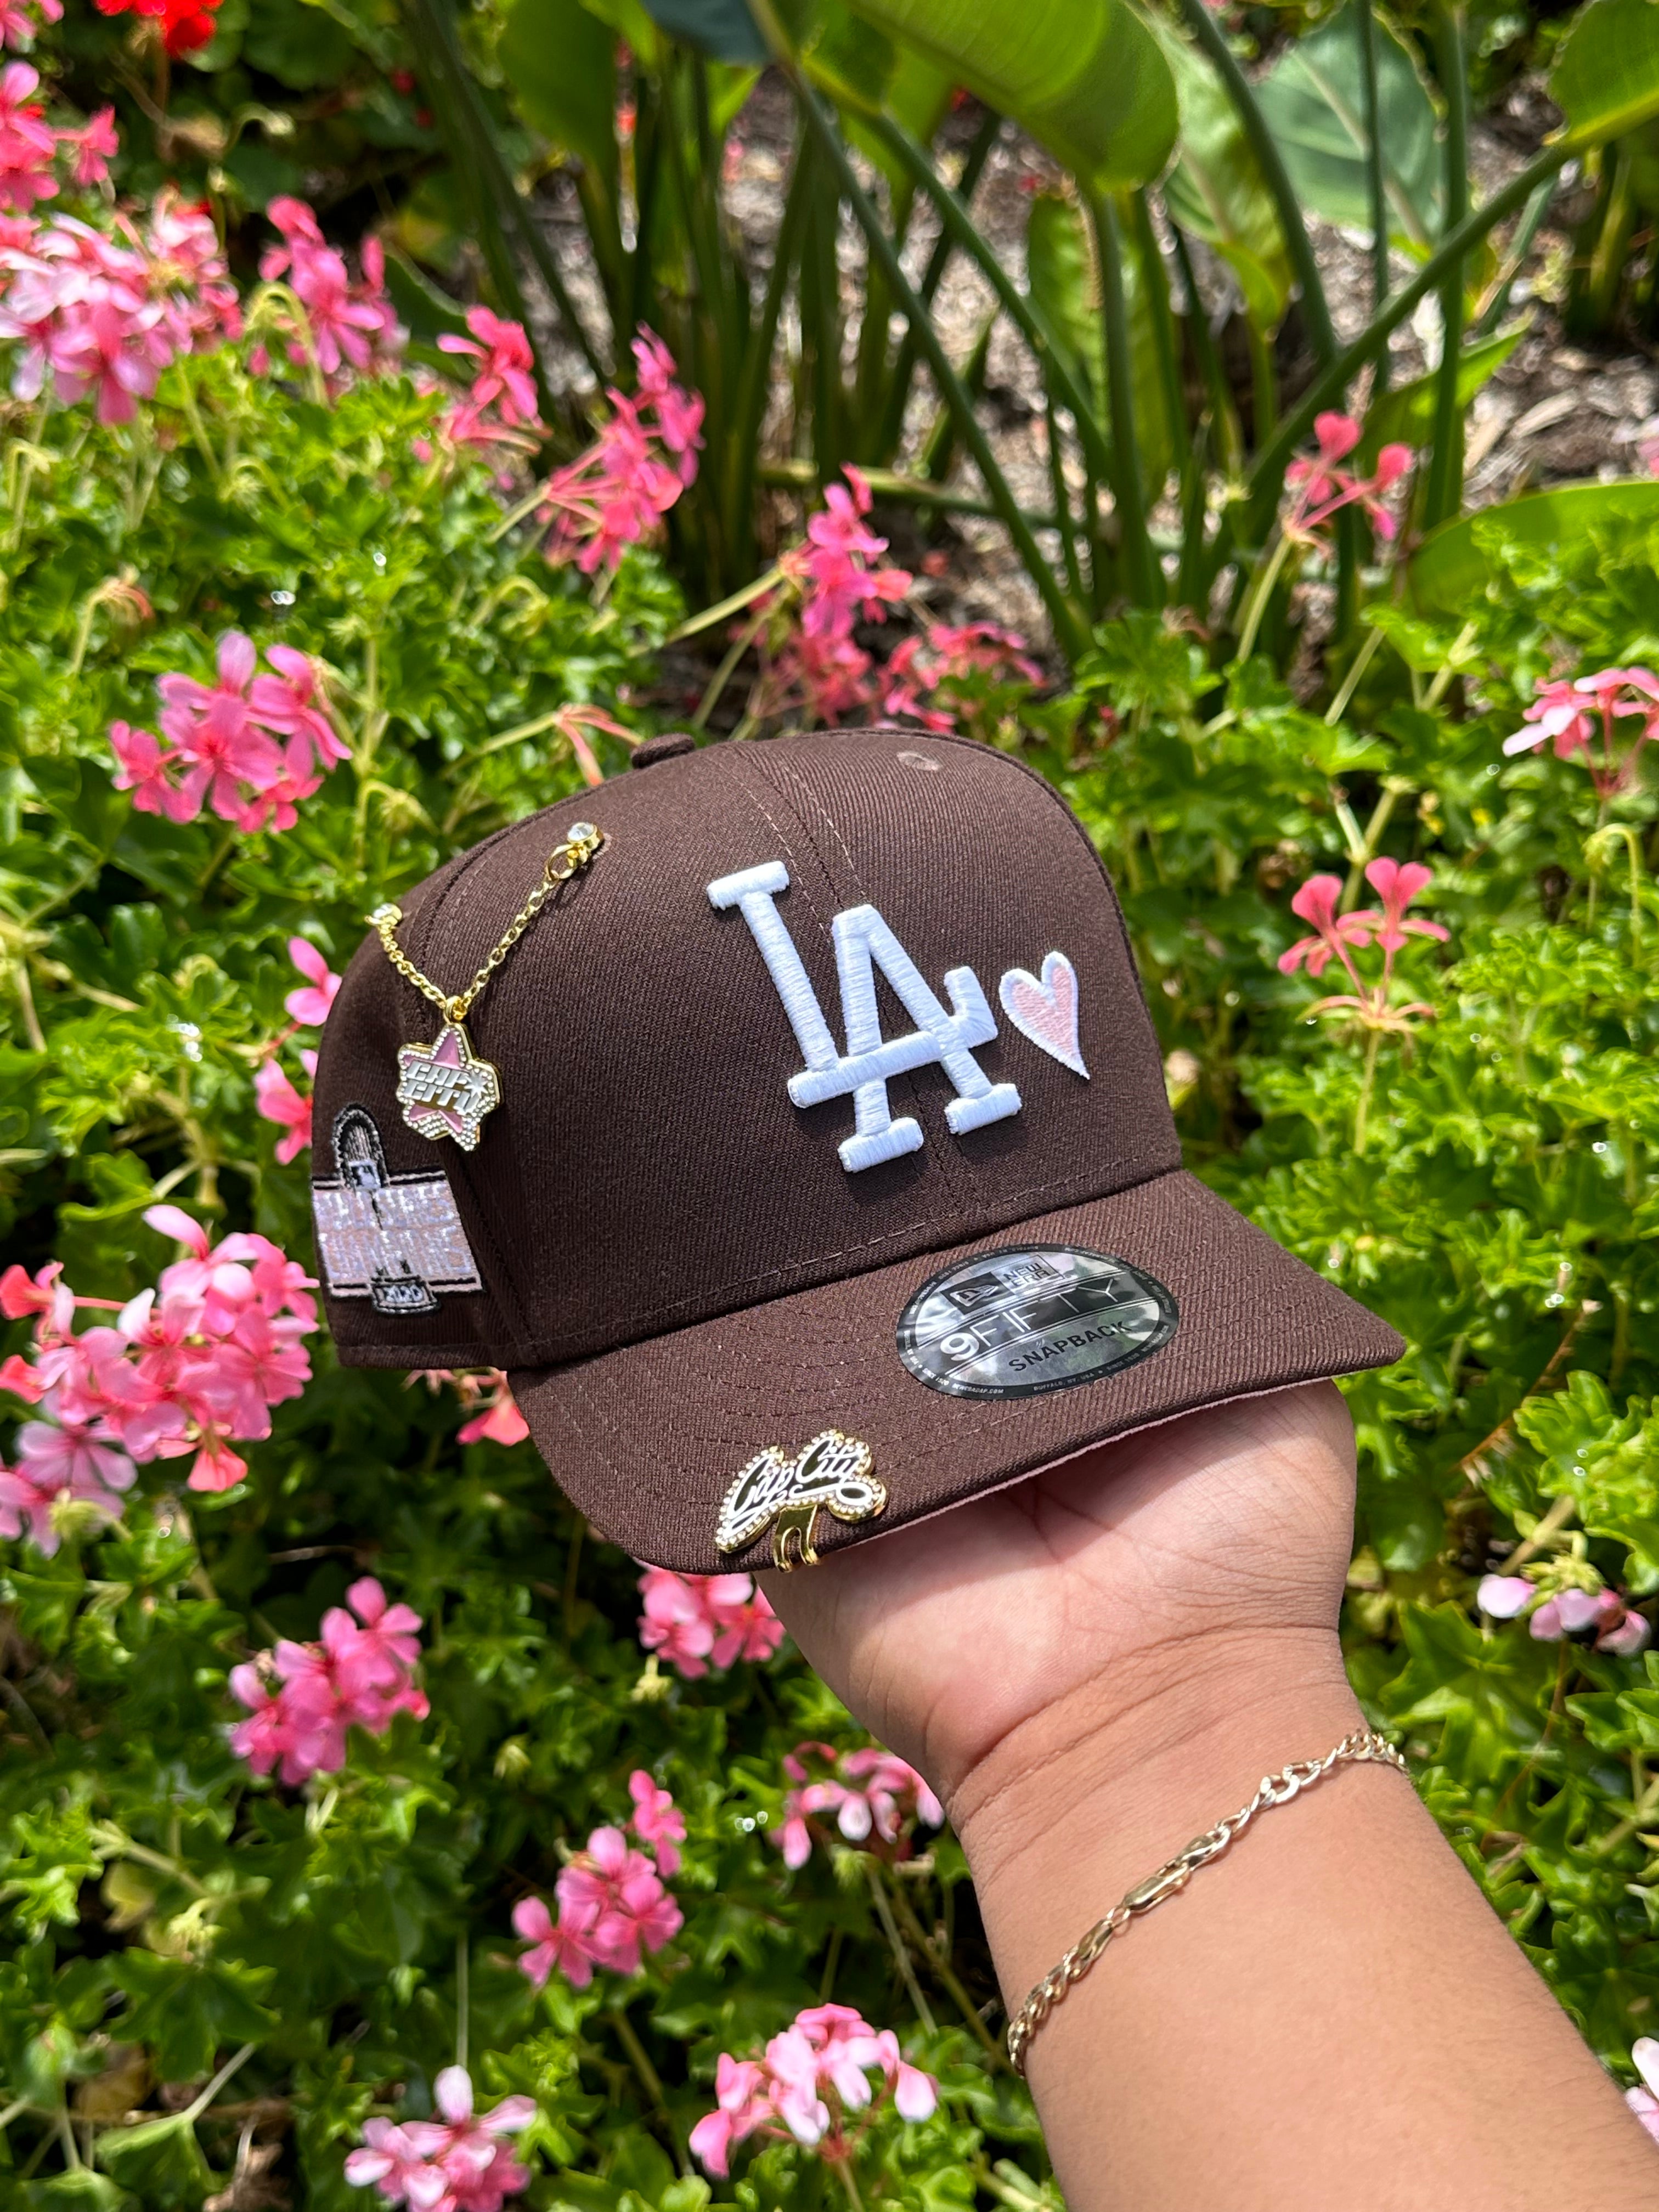 NEW ERA EXCLUSIVE 9FIFTY BURNT WOOD LOS ANGELES DODGERS SNAPBACK W/ PINK HEART + 2020 WS CHAMPIONS SIDE PATCH